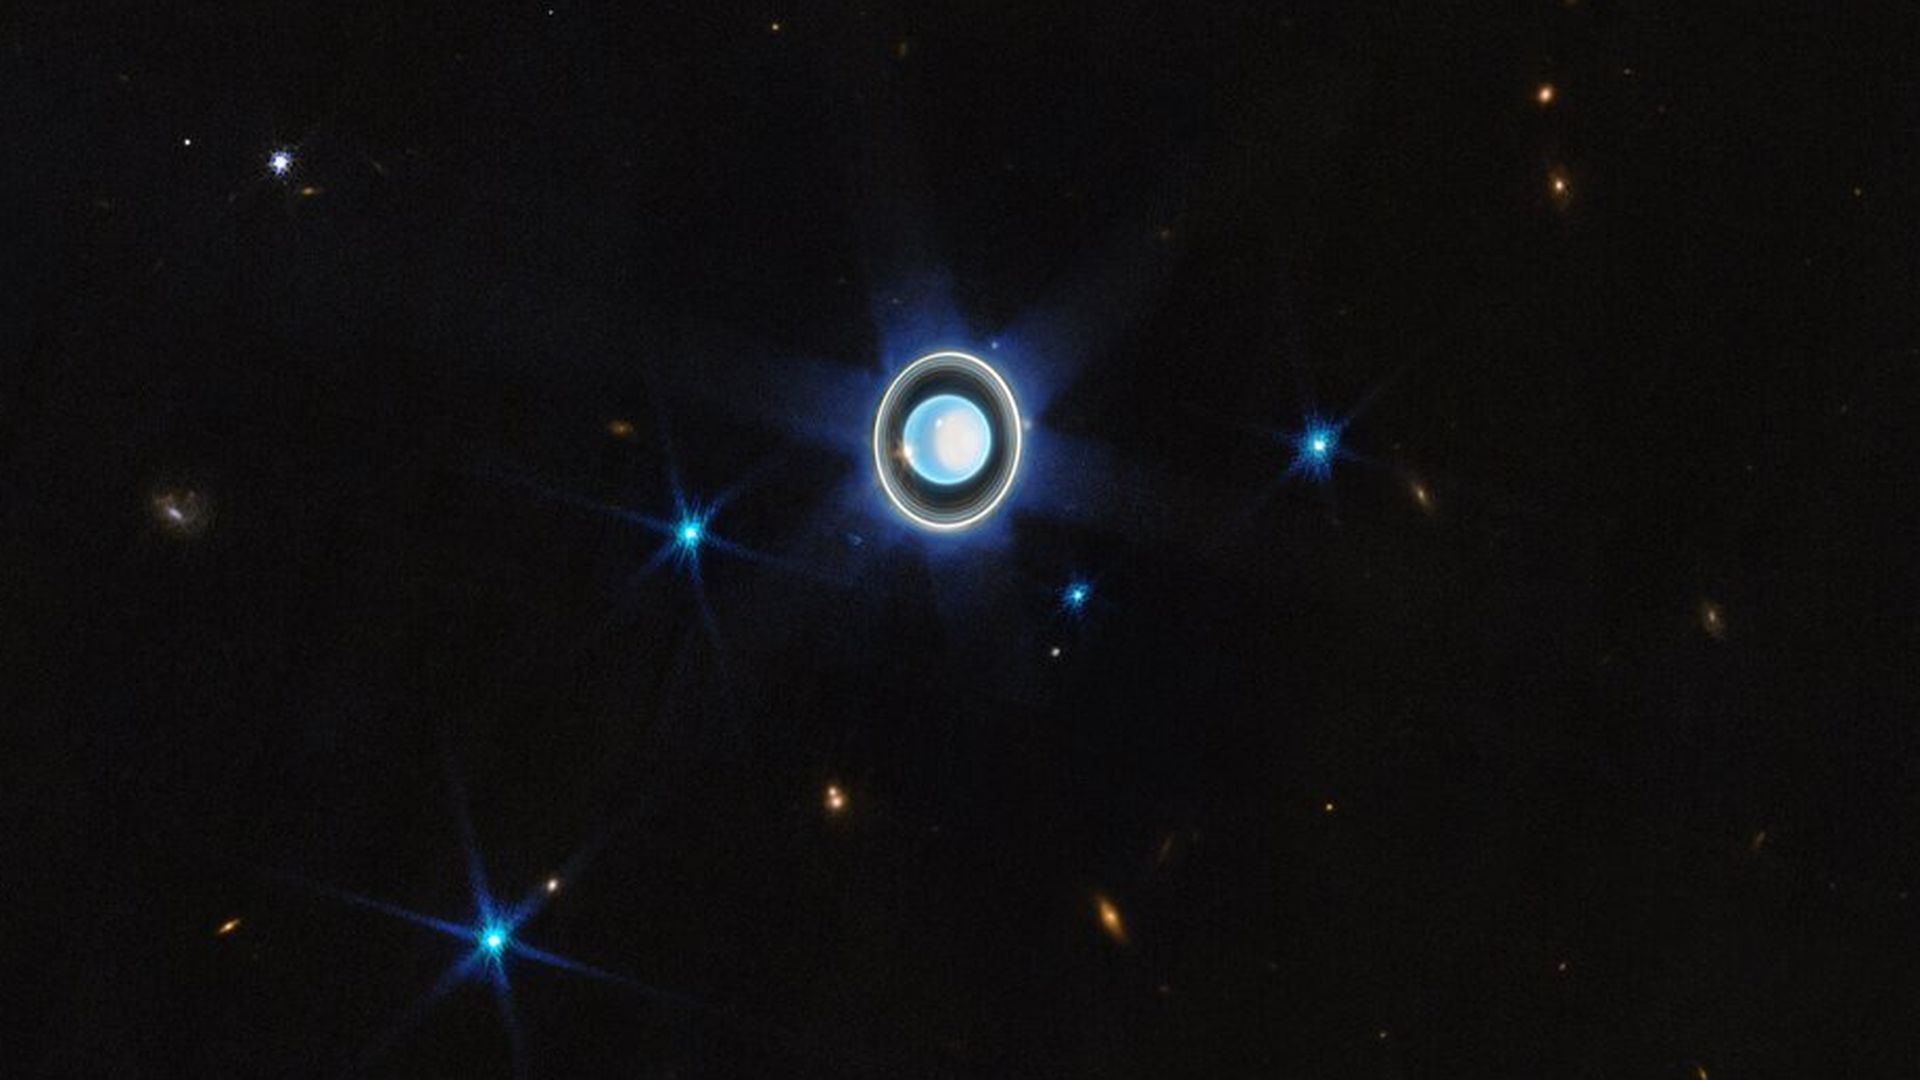 Uranus and its shining rings as seen by the James Webb Space Telescope